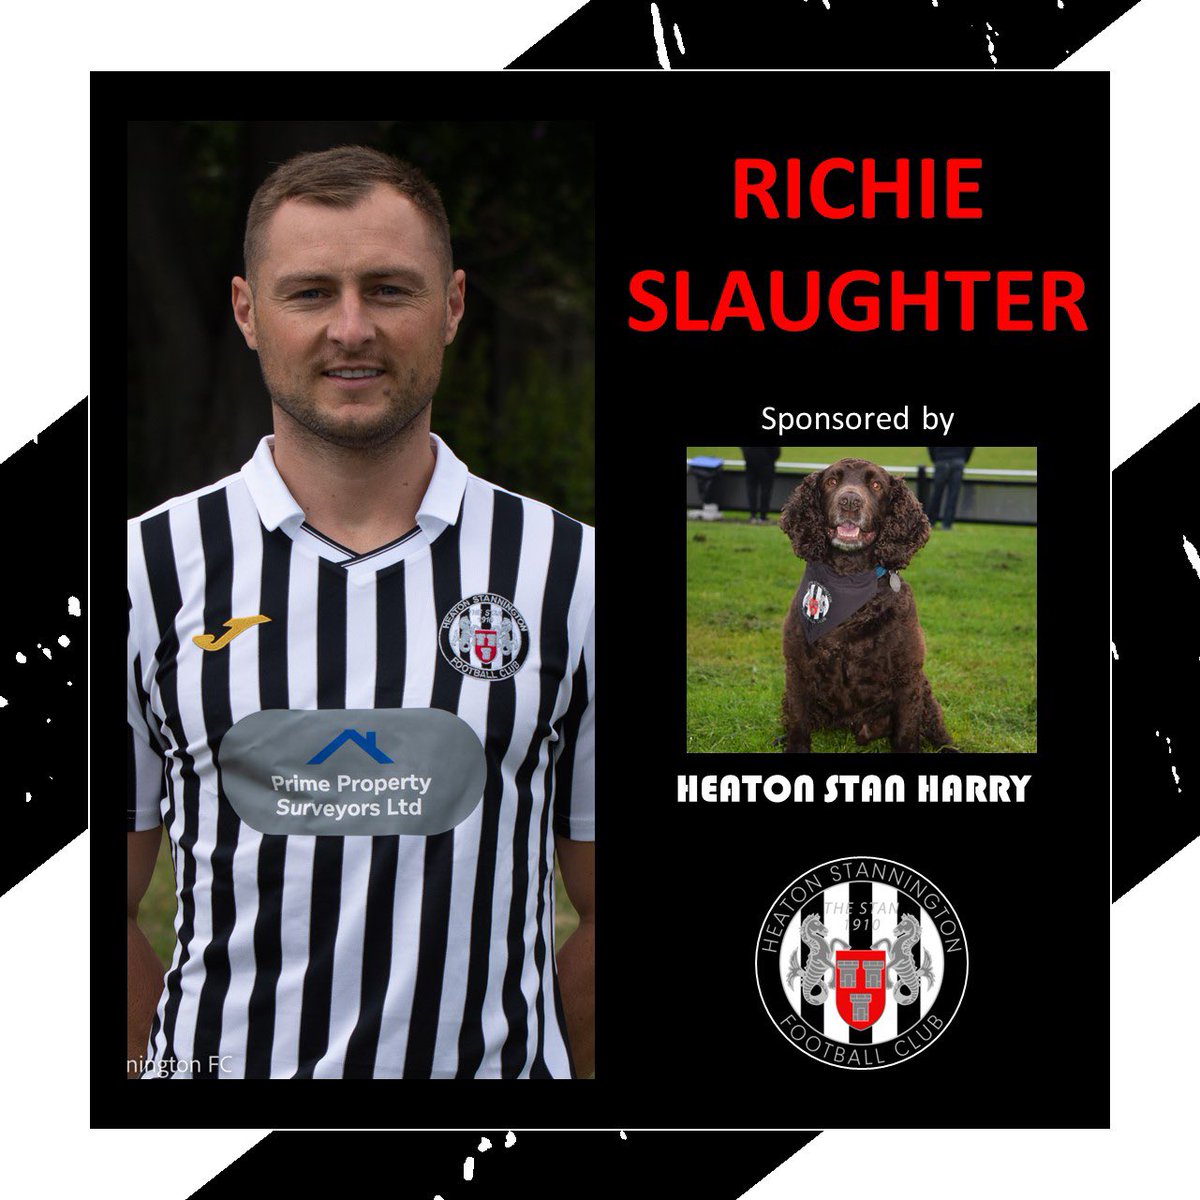 SUPPORTERS MAN OF THE MATCH

The fans voted for Richie Slaughter as their MOTM this afternoon. 

Good day for Richie’s loyal sponsor @heatonstanharry who gets his second shout out!